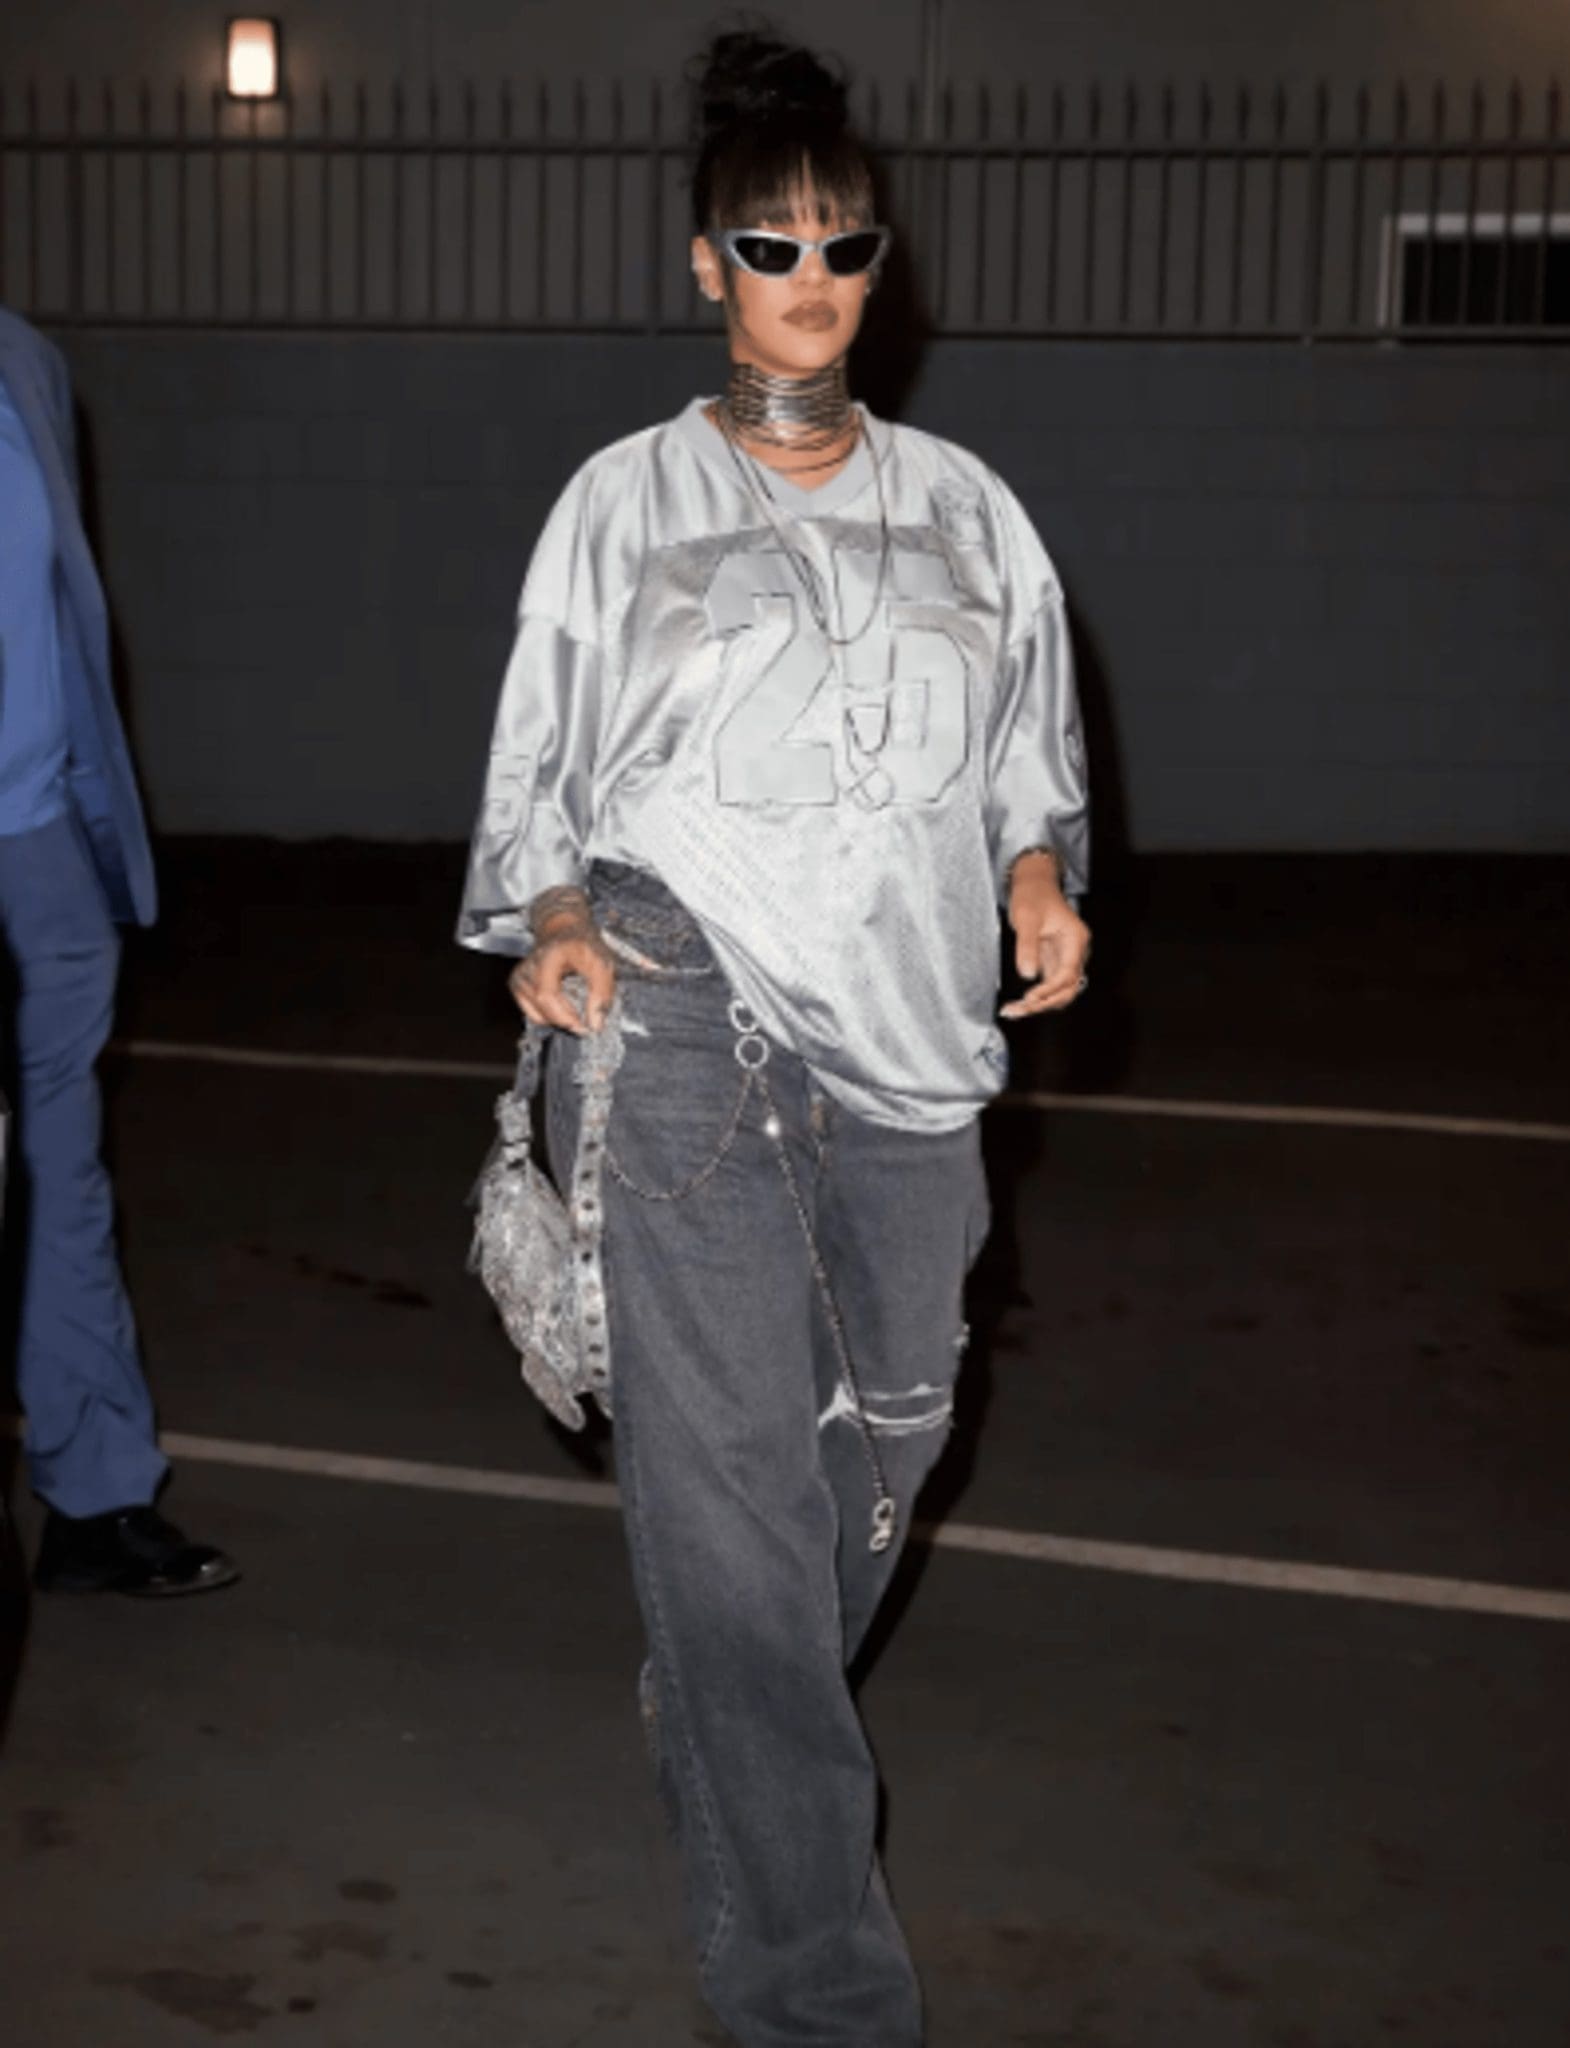 Rihanna was spotted out and about wearing a glistening D pendant, which has led to speculation regarding the name of her child